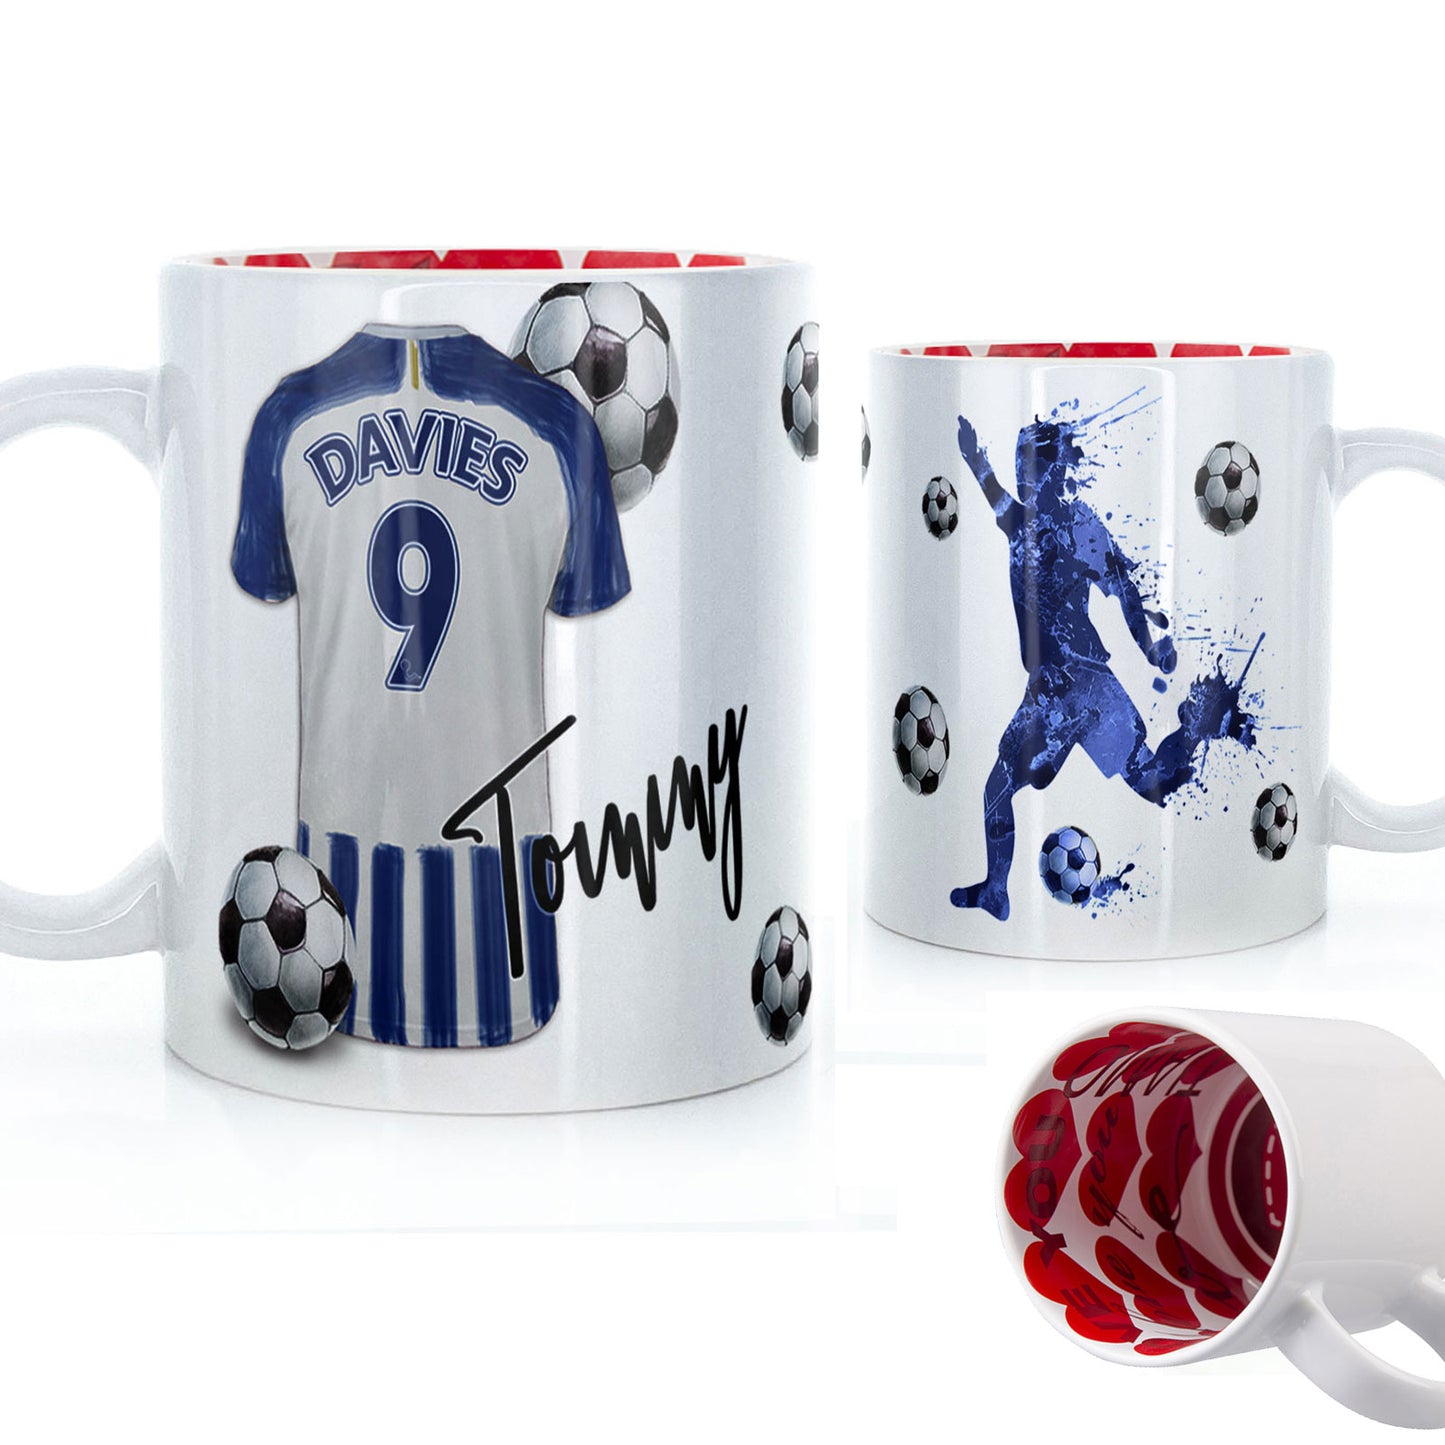 Personalised Mug with Stylish Text and White & Blue Striped Shirt with Name & Number